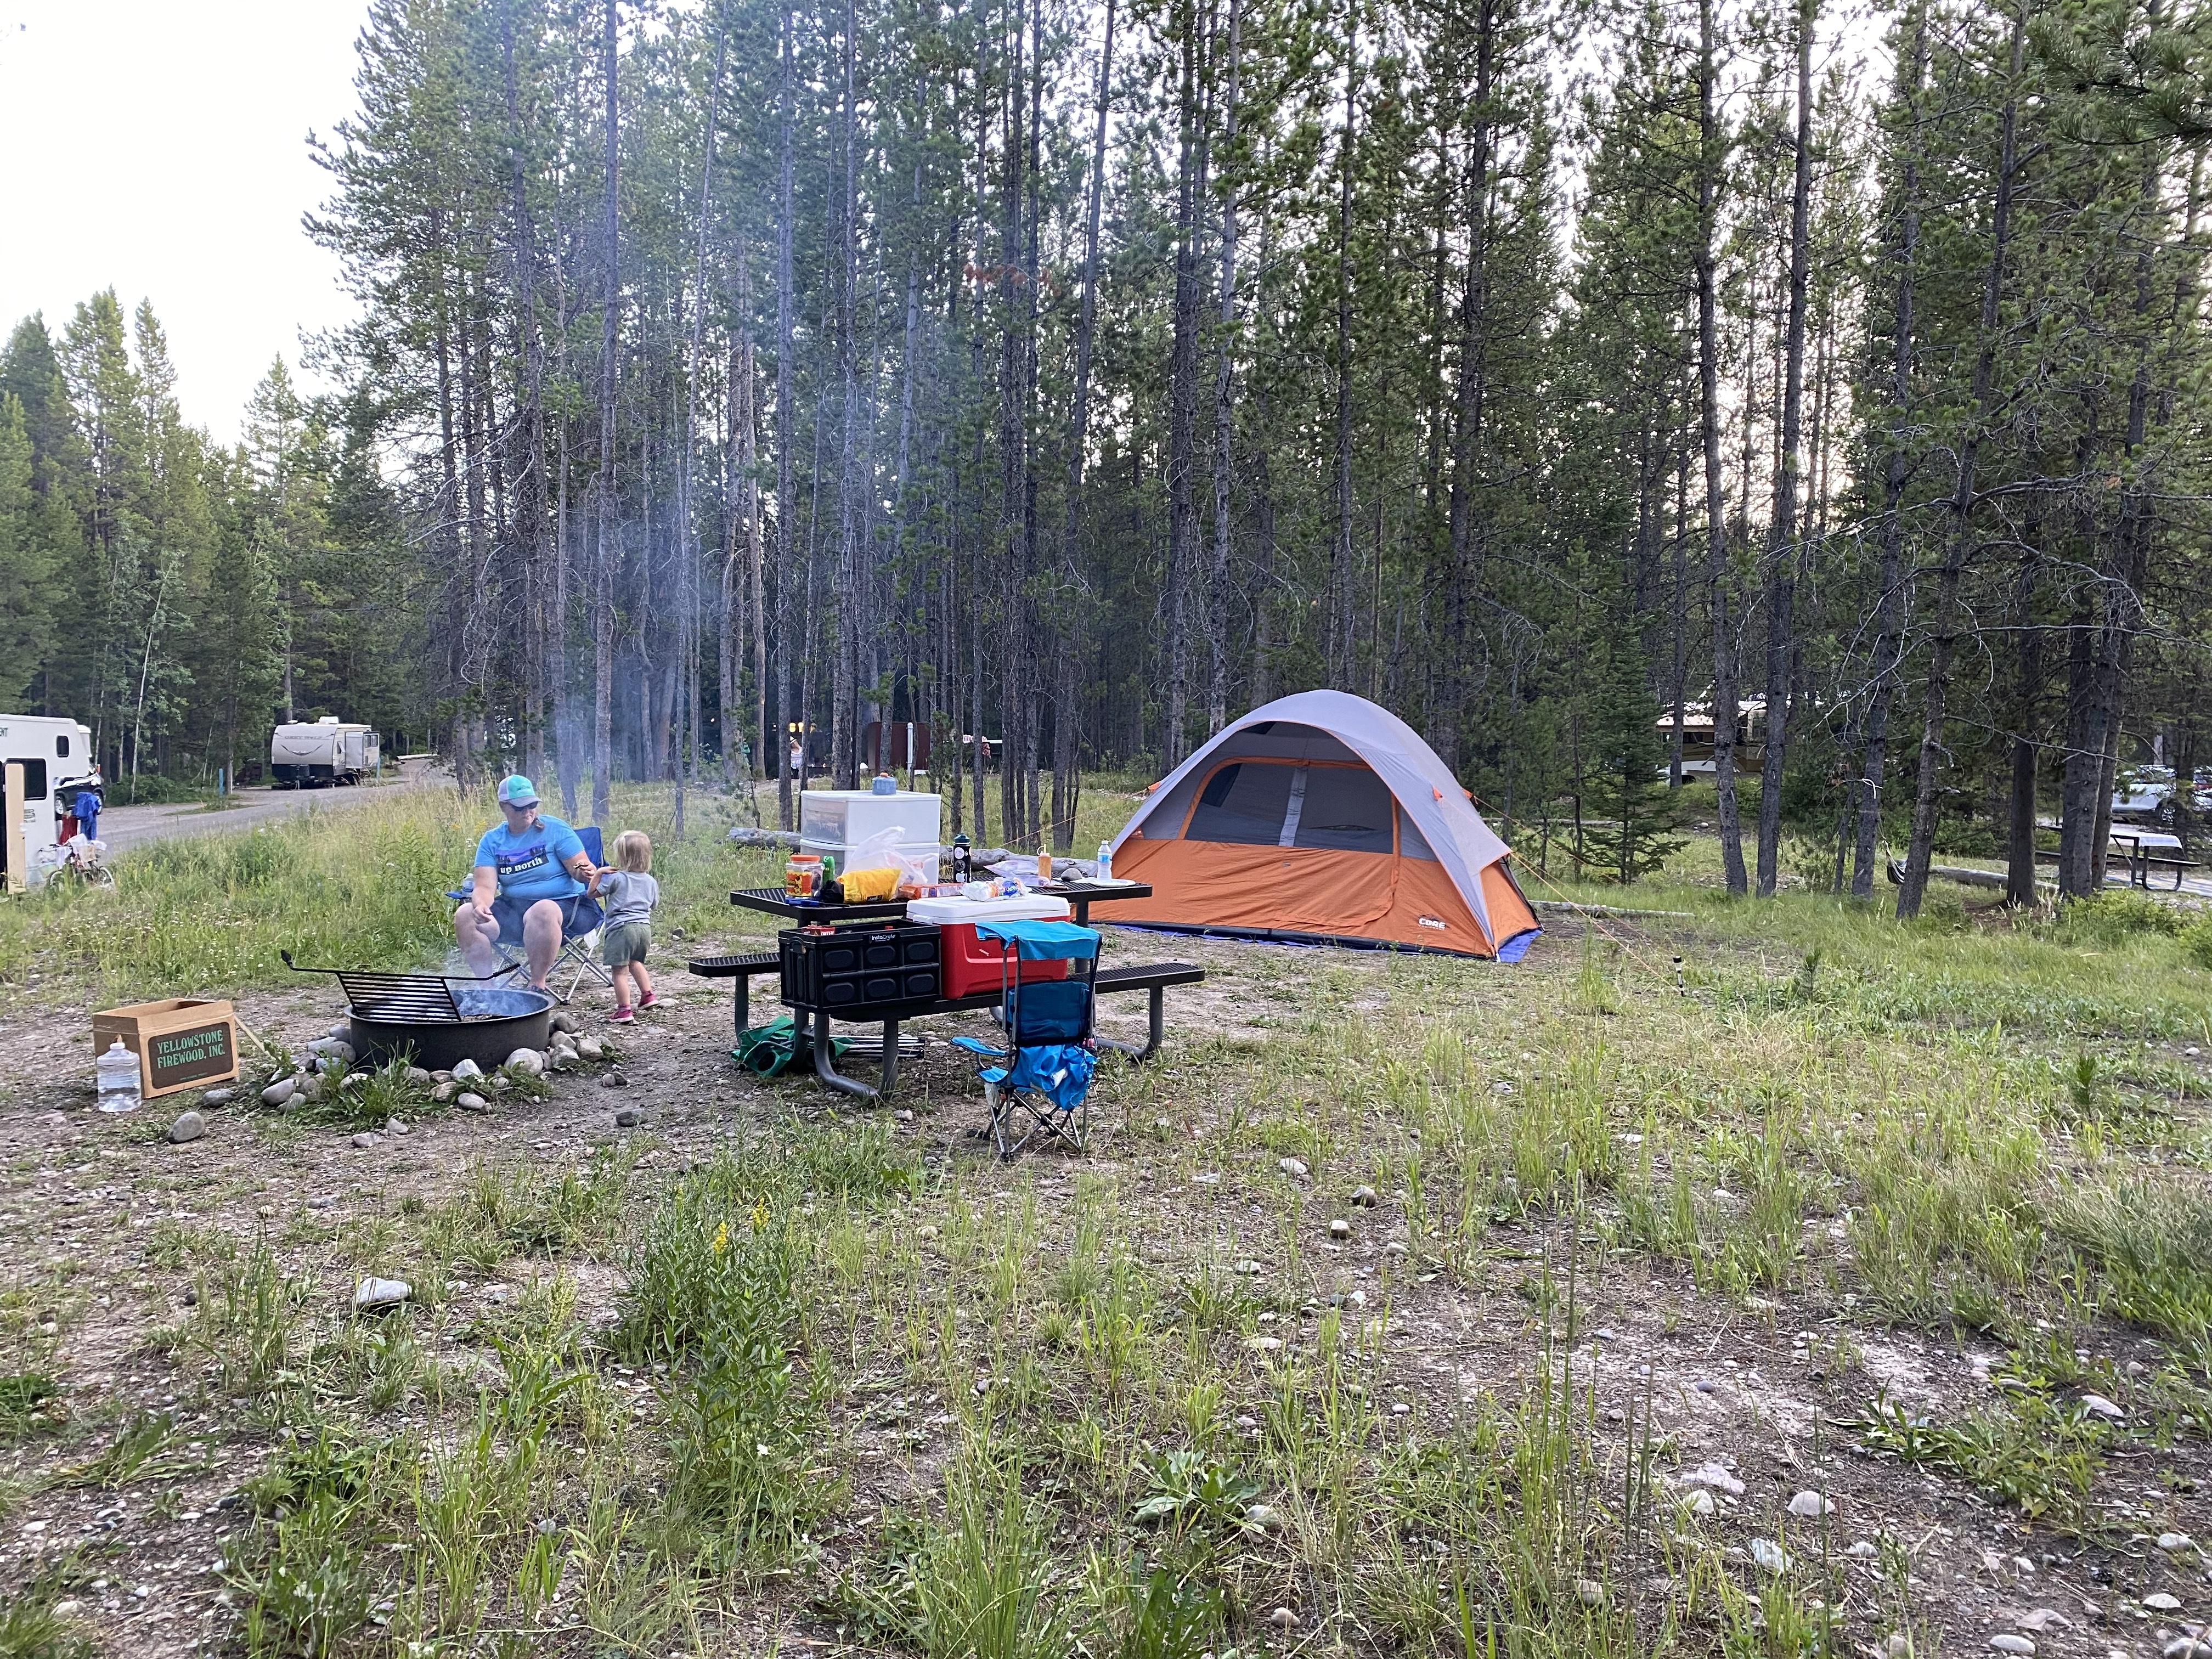 Campsite at the Colter Bay Campground at Grand Teton National Park